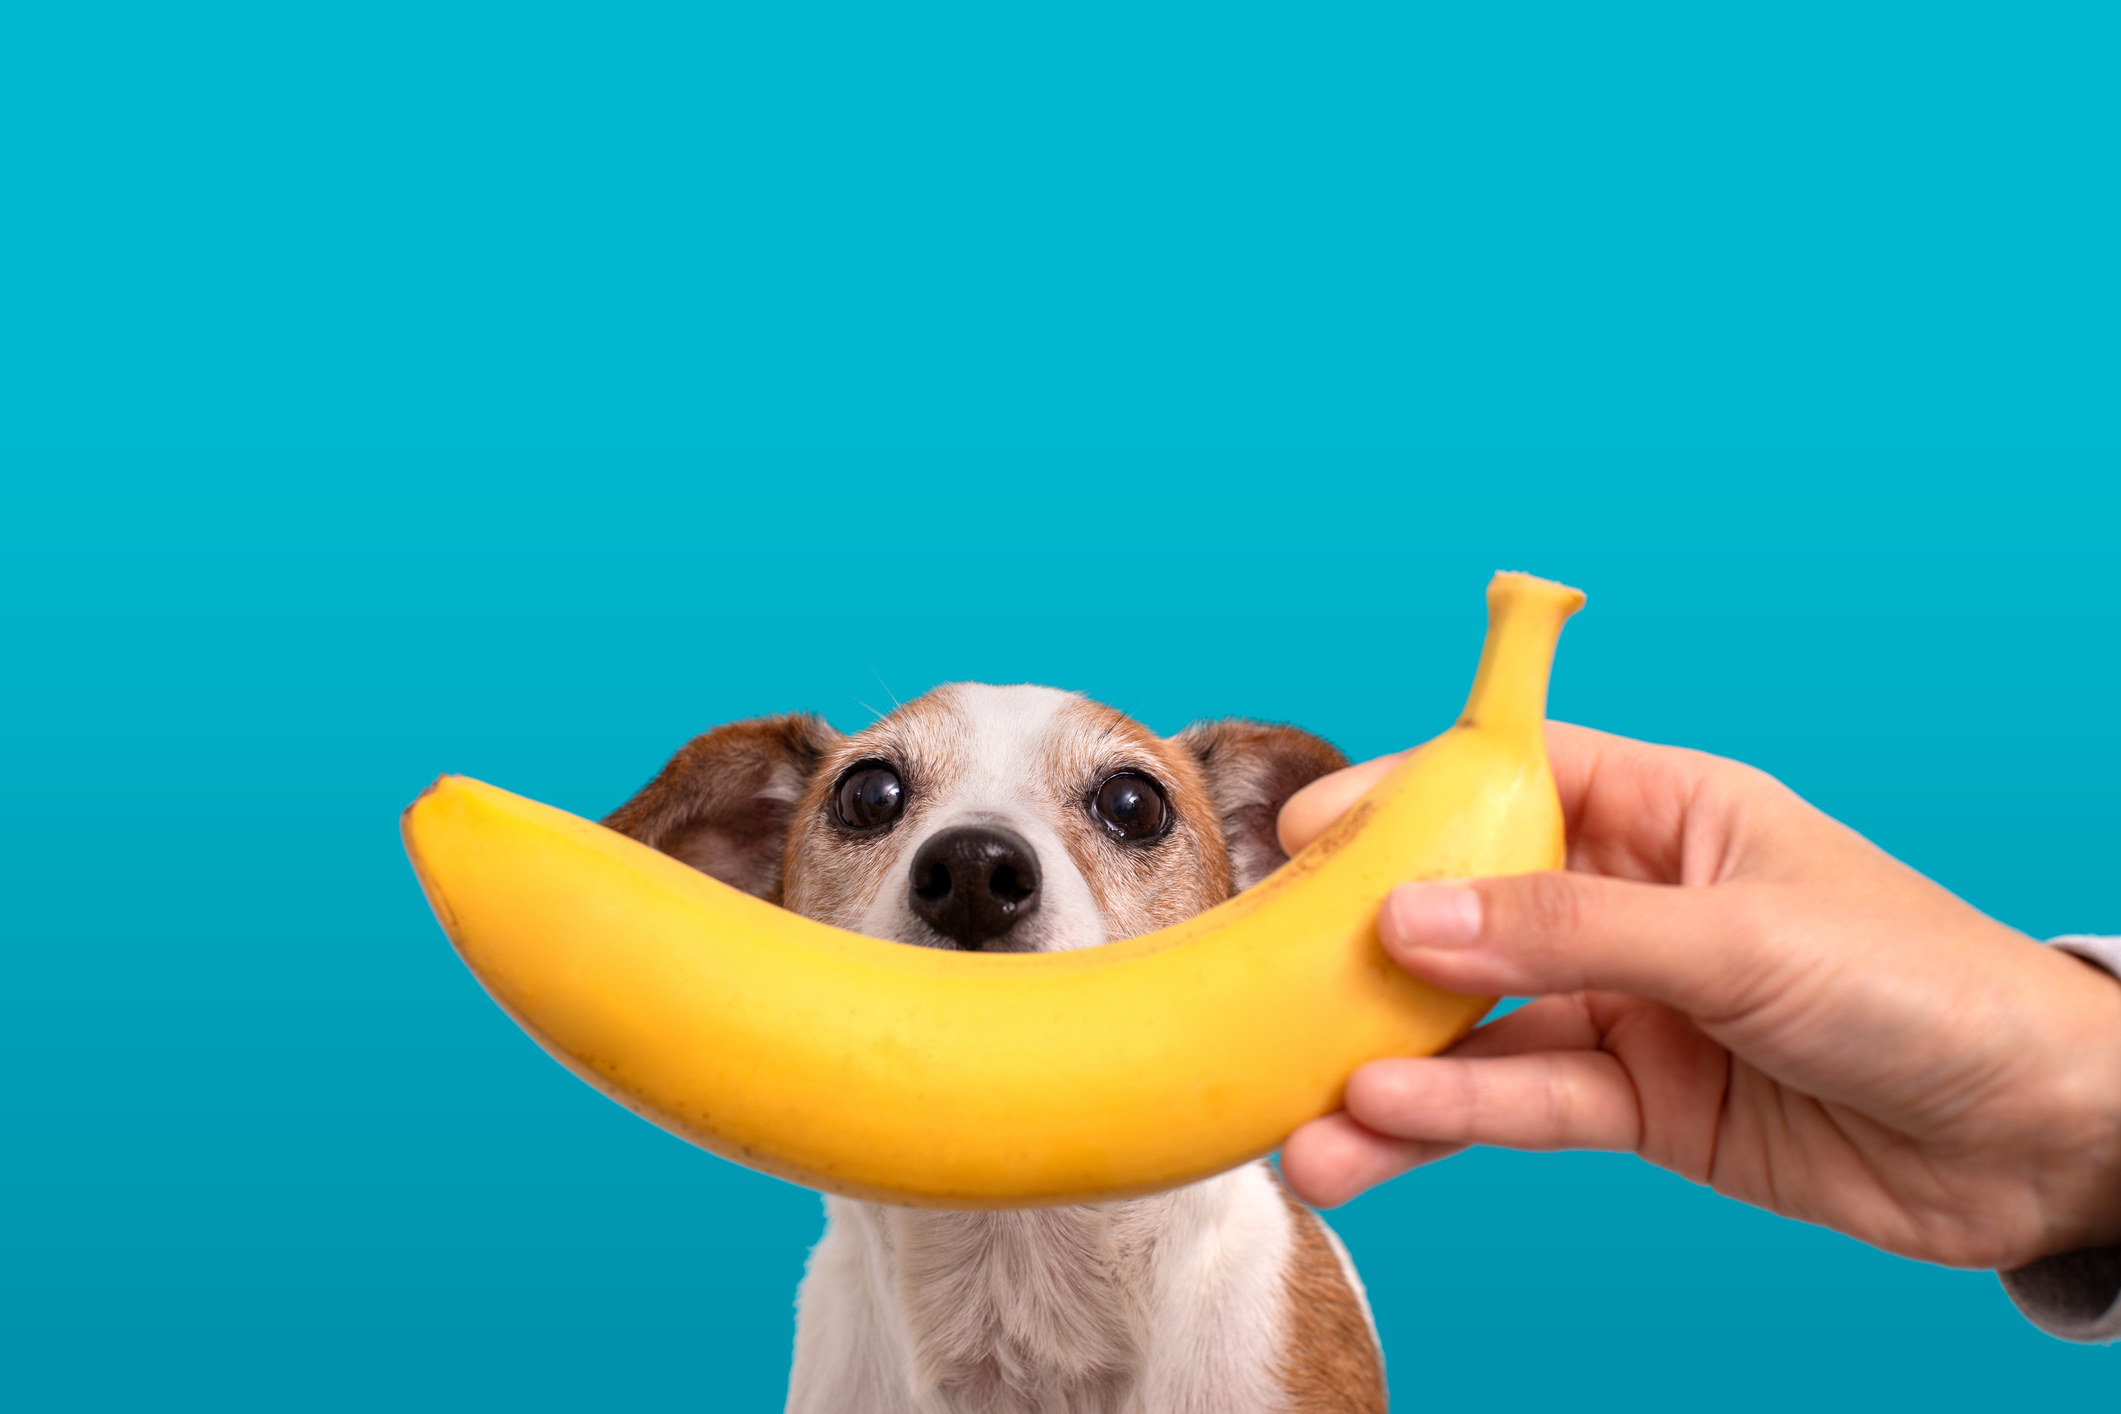 Cropped hand holding a bright banana in front of a small dog with brown and white fur, looking at camera on blue background